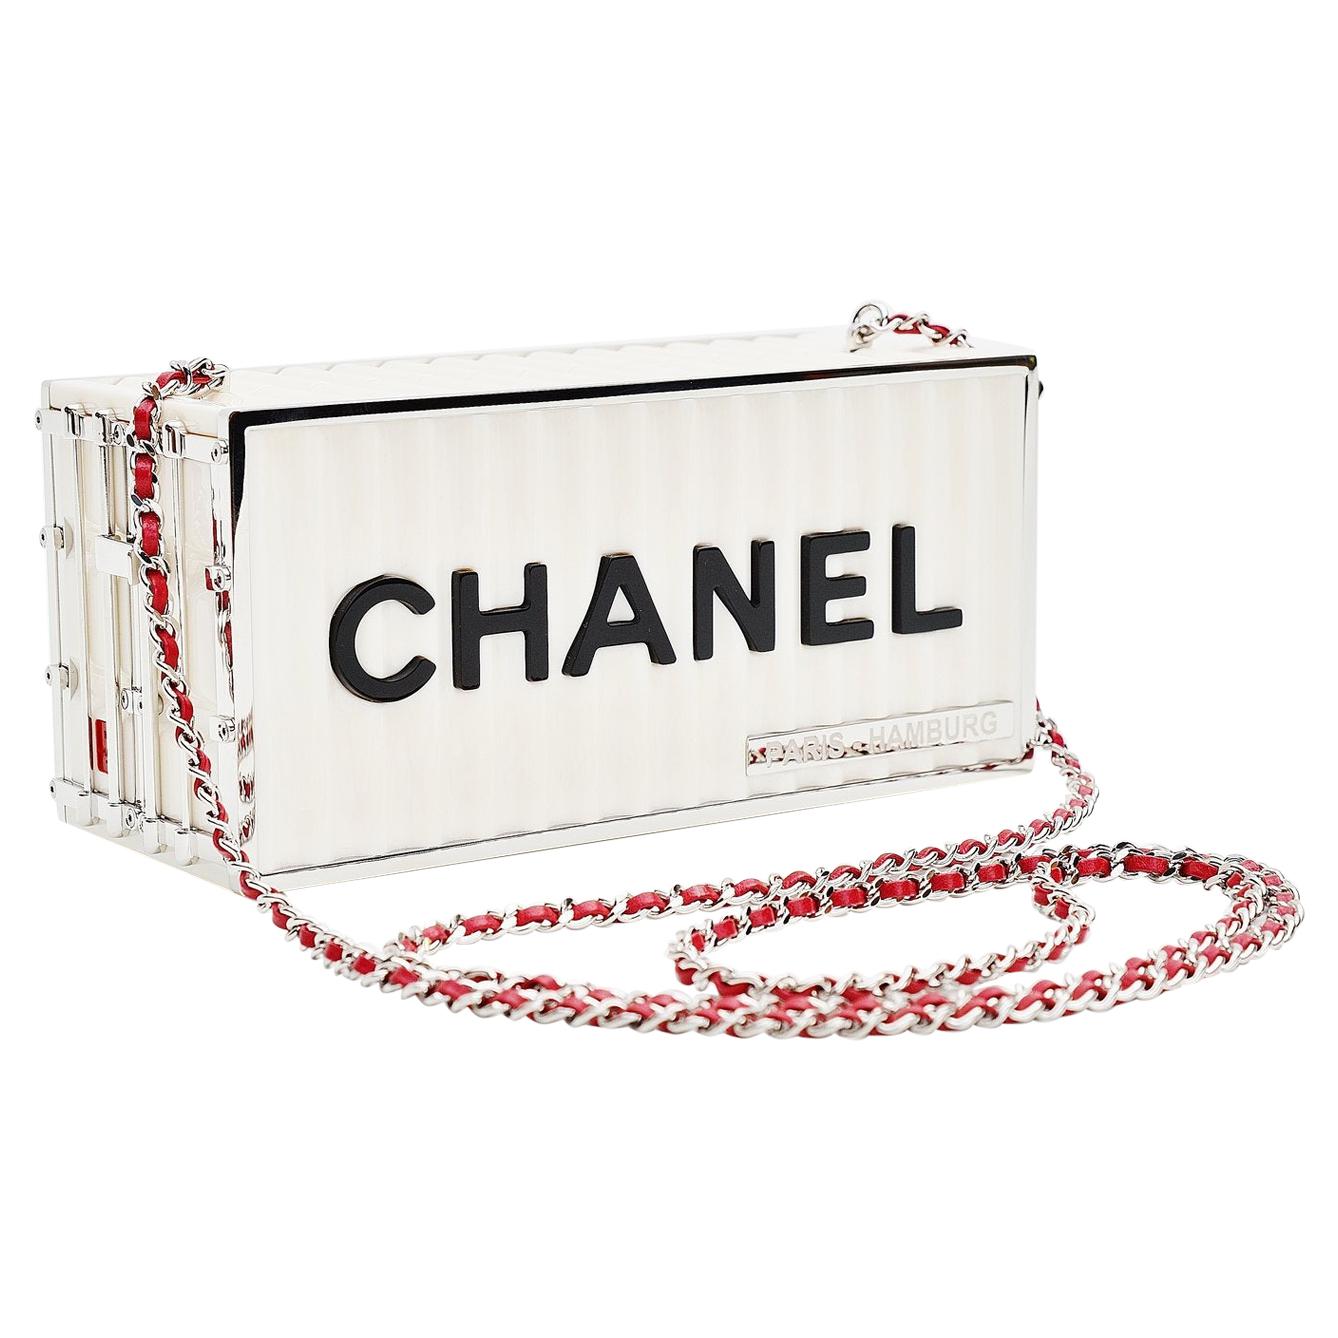 Chanel Runway Container Clutch/ Shoulder Bag Karl Lagerfeld NEW at